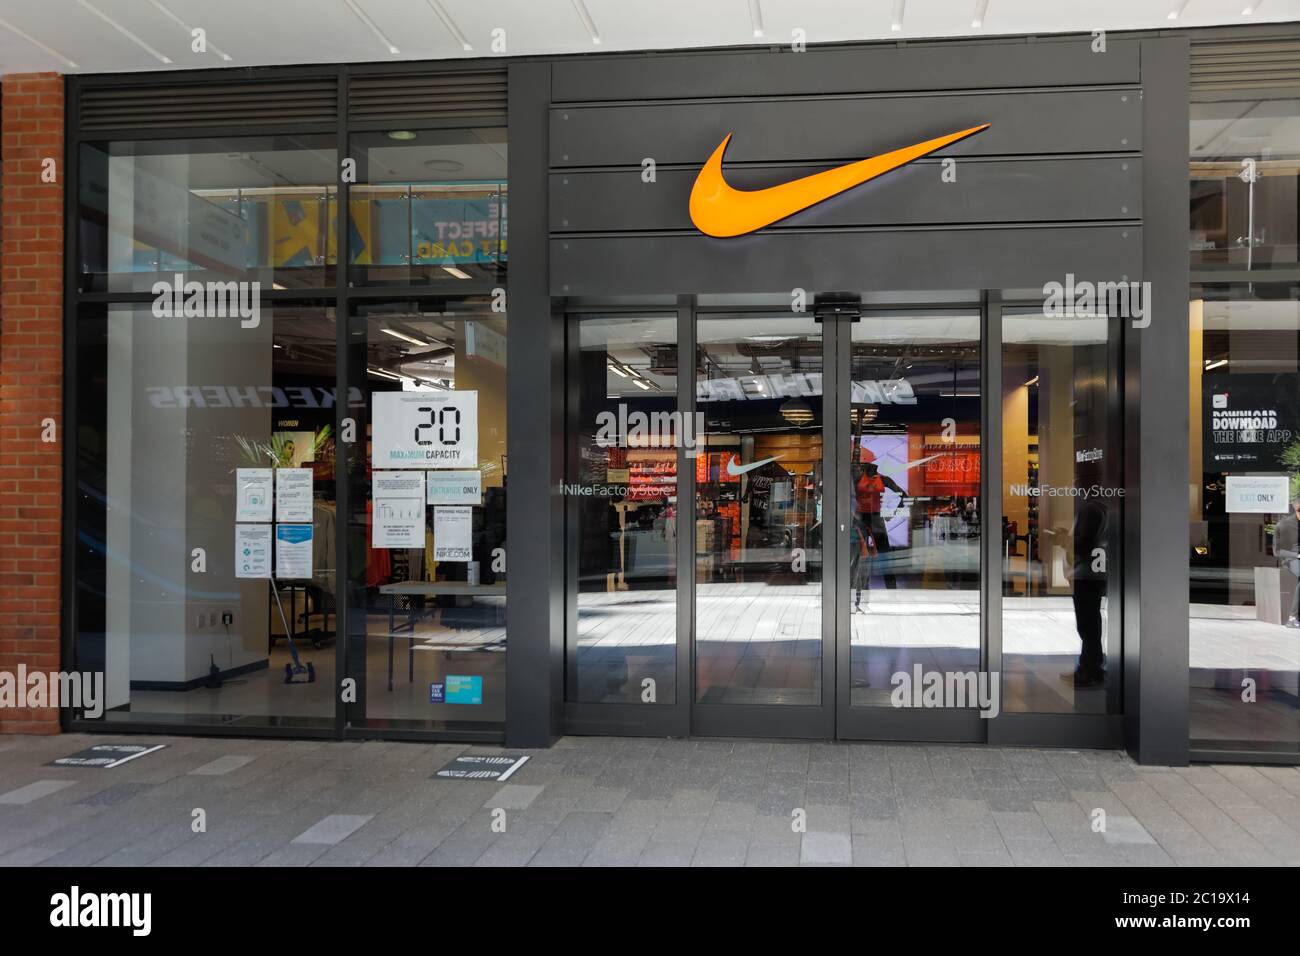 is the nike outlet open today